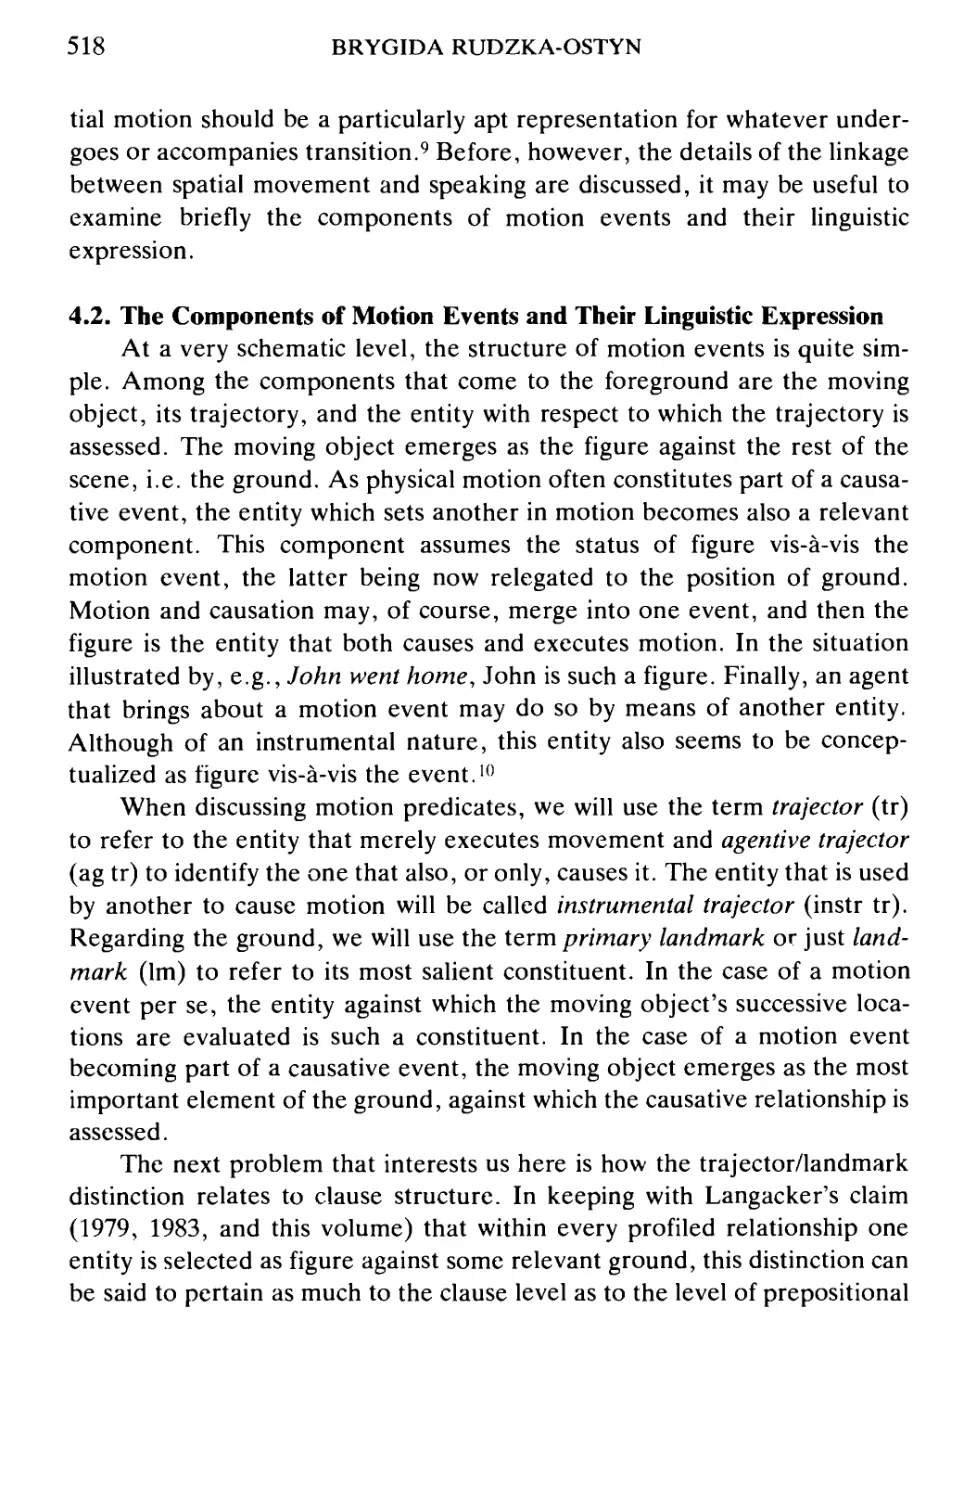 4.2. The Components of Motion Events and Their Linguistic Expression